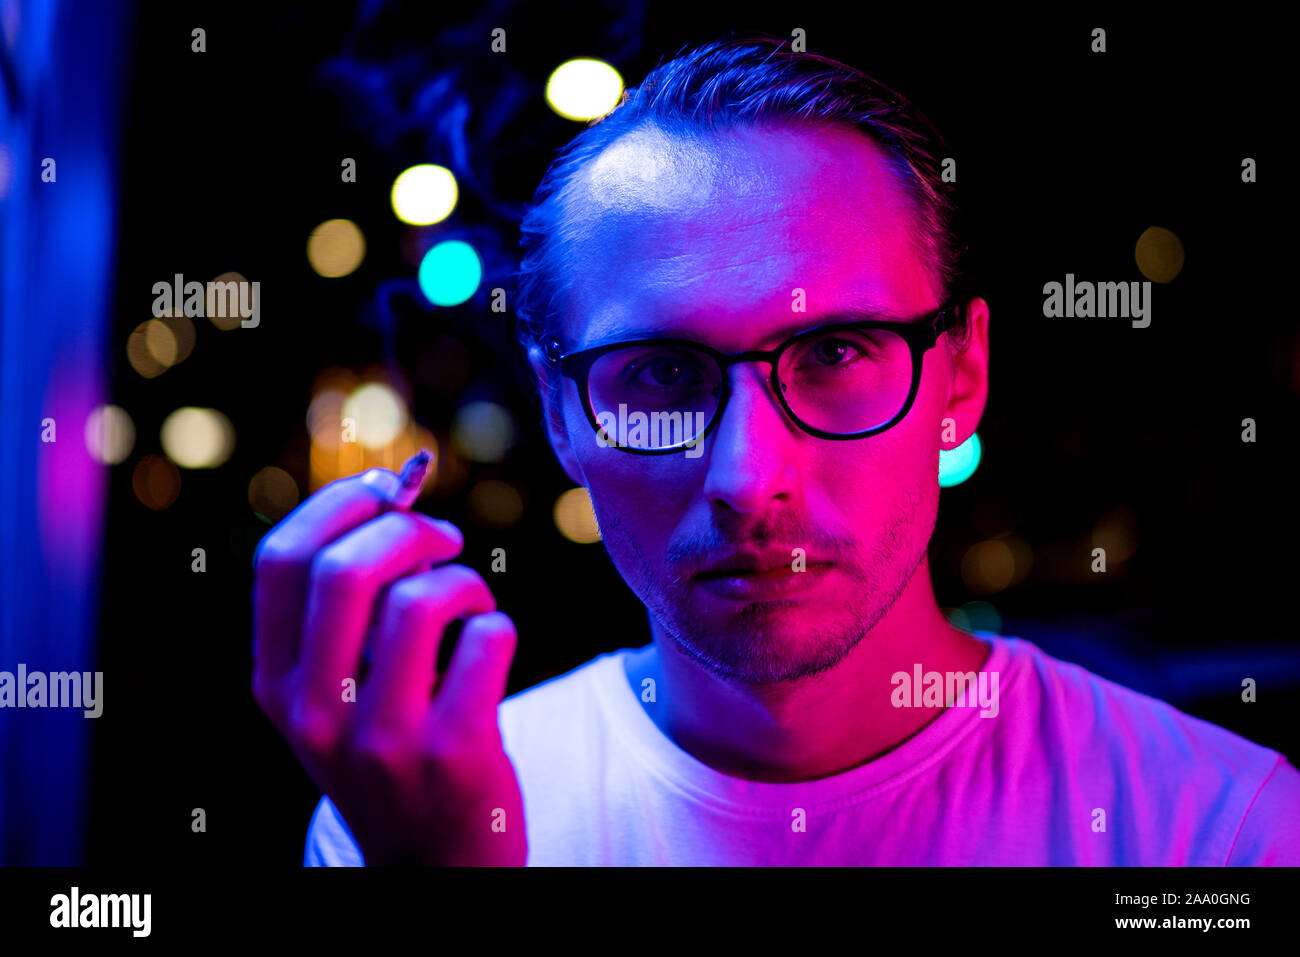 Vintage, red and blue portrait of a young man smoking a cigarette. Street lights visible in the background. Stock Photo